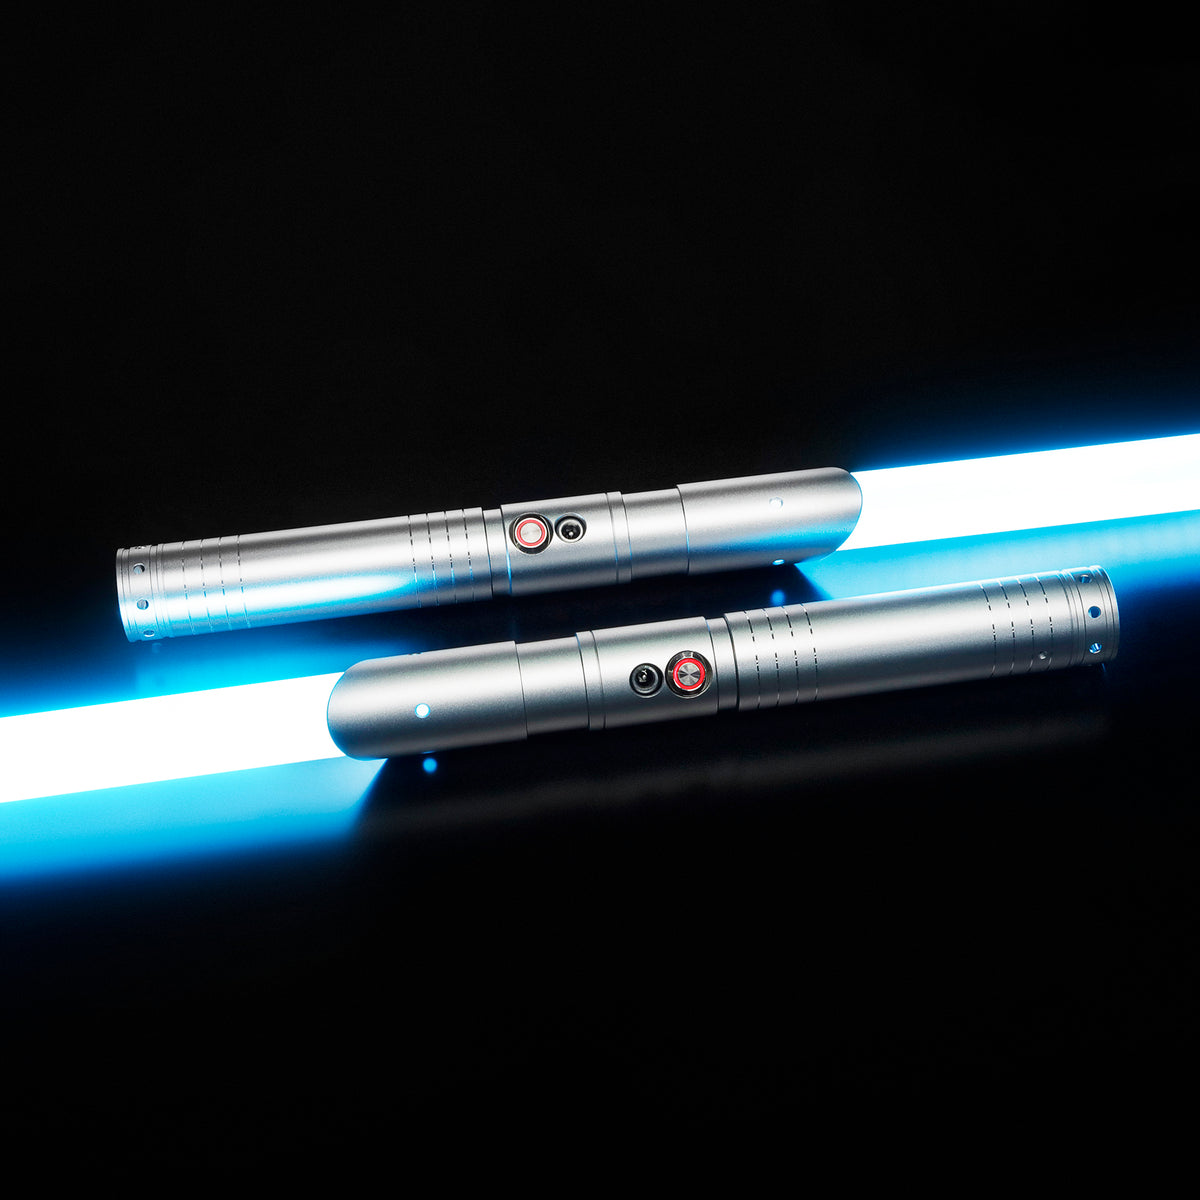 2 x SaberCustom heavy dueling lightsaber fx smooth swing 16 sound fonts infinite color changing 72CM blade Z4 2 x Grey